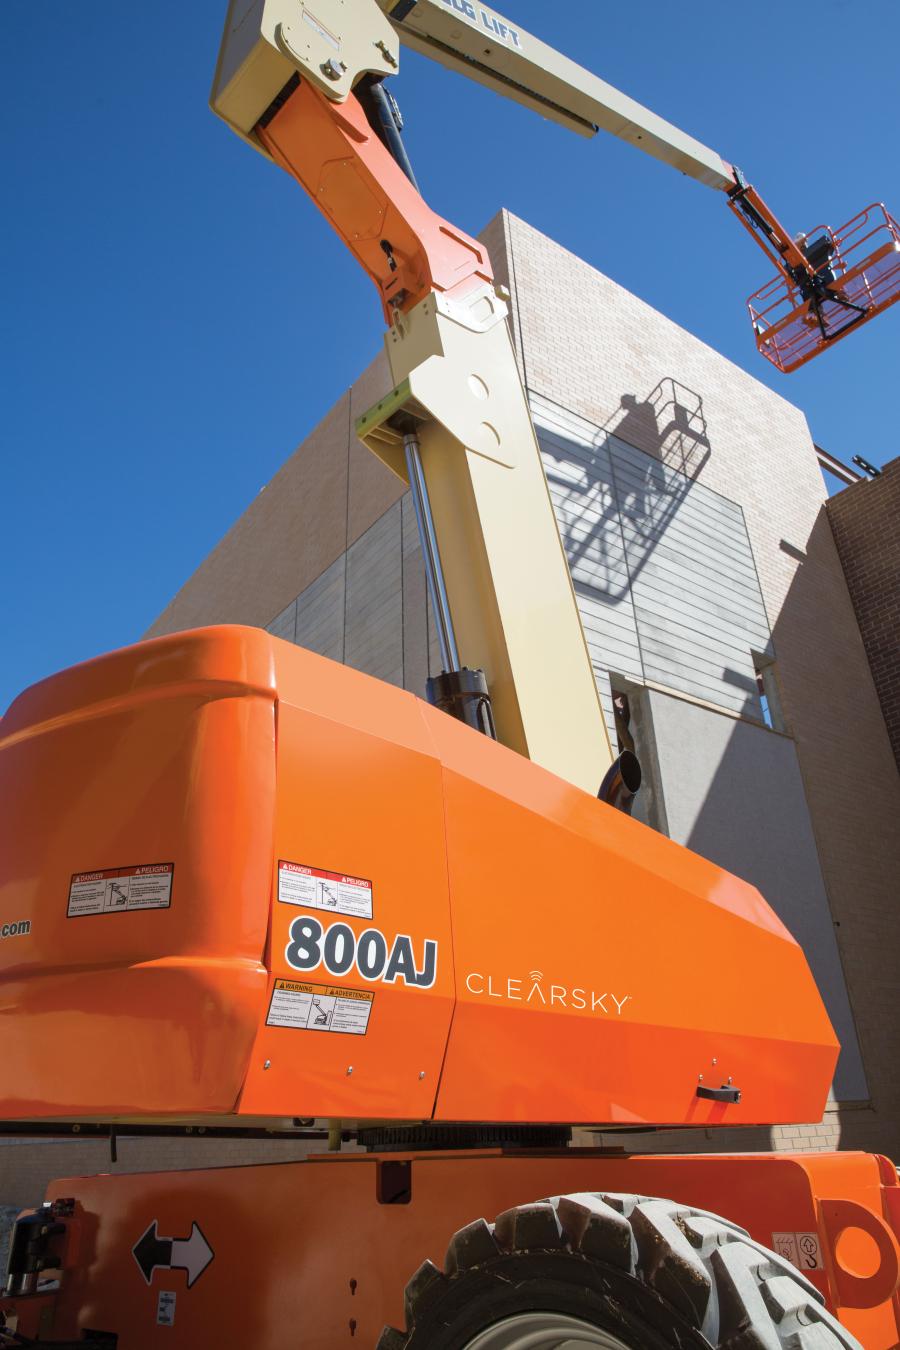 ClearSky is offered as a factory-installed option for new JLG machines or as an aftermarket installation kit to retrofit JLG products in the field.